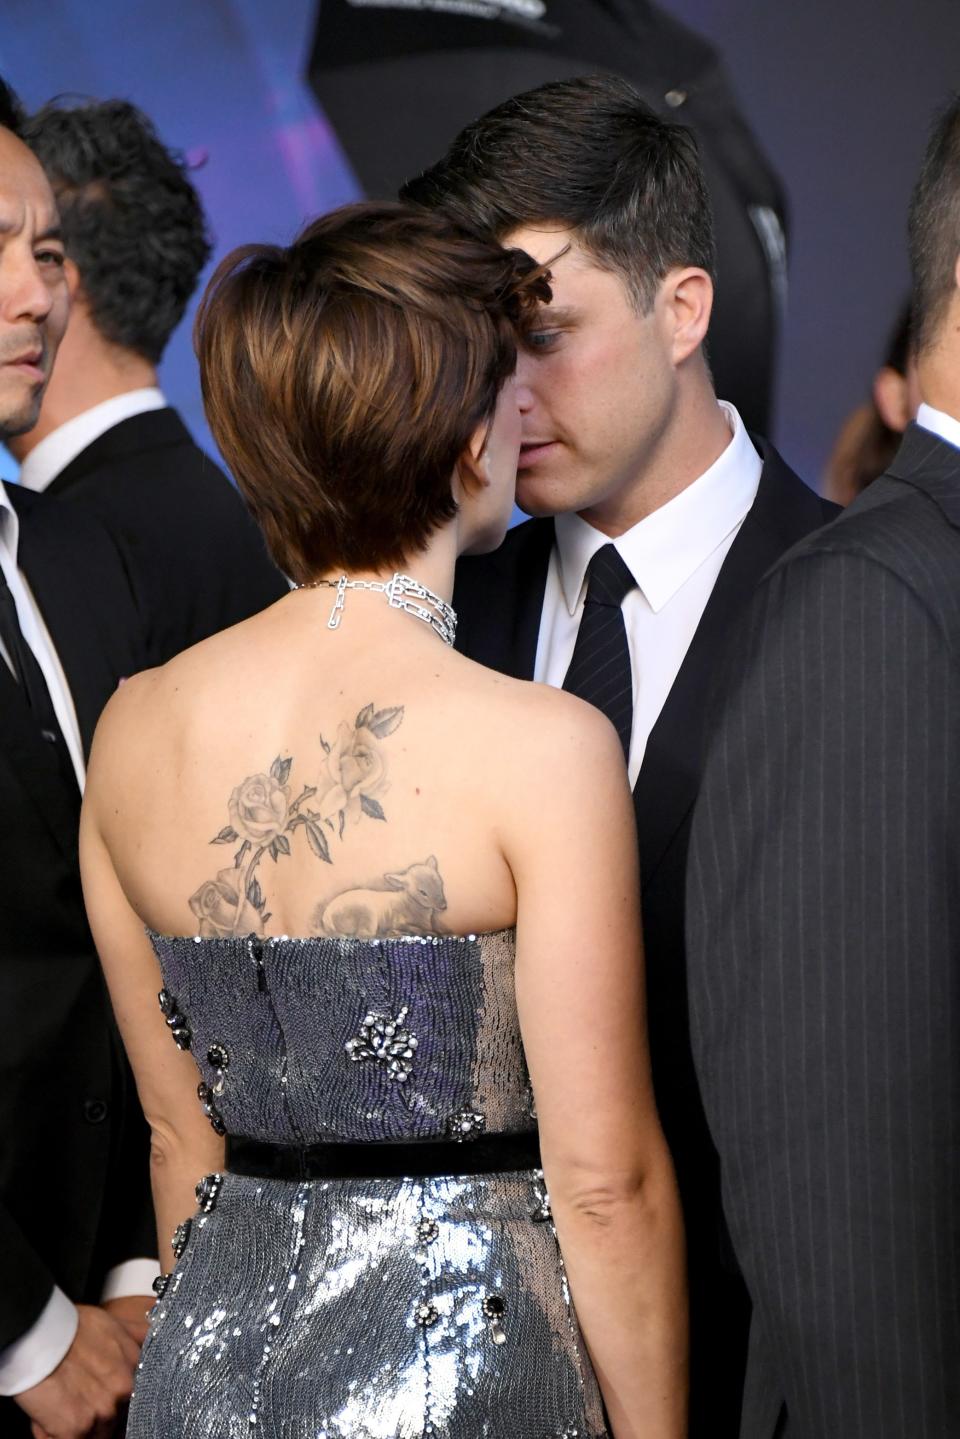 At the premiere of "Avengers: Infinity War," we all got a glimpse of Scarlett Johansson's back tattoos, which include black-and-white roses and a black-and-white lamb.